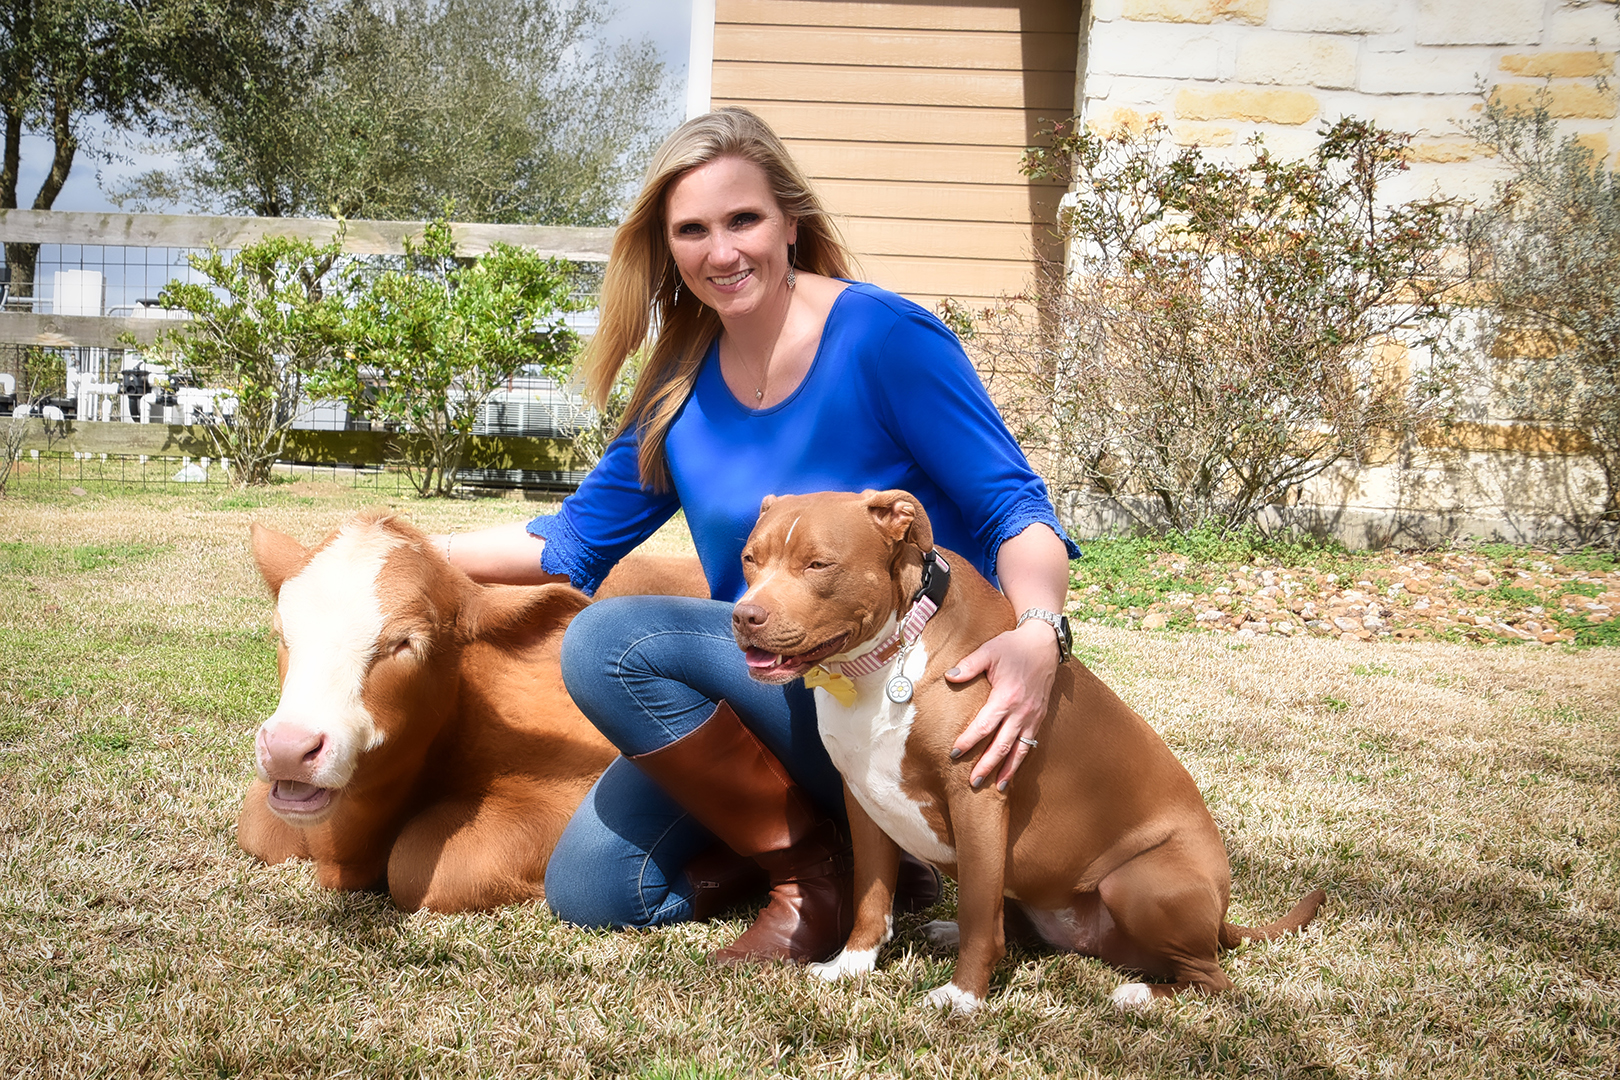 A calf, woman, and dog sitting side by side